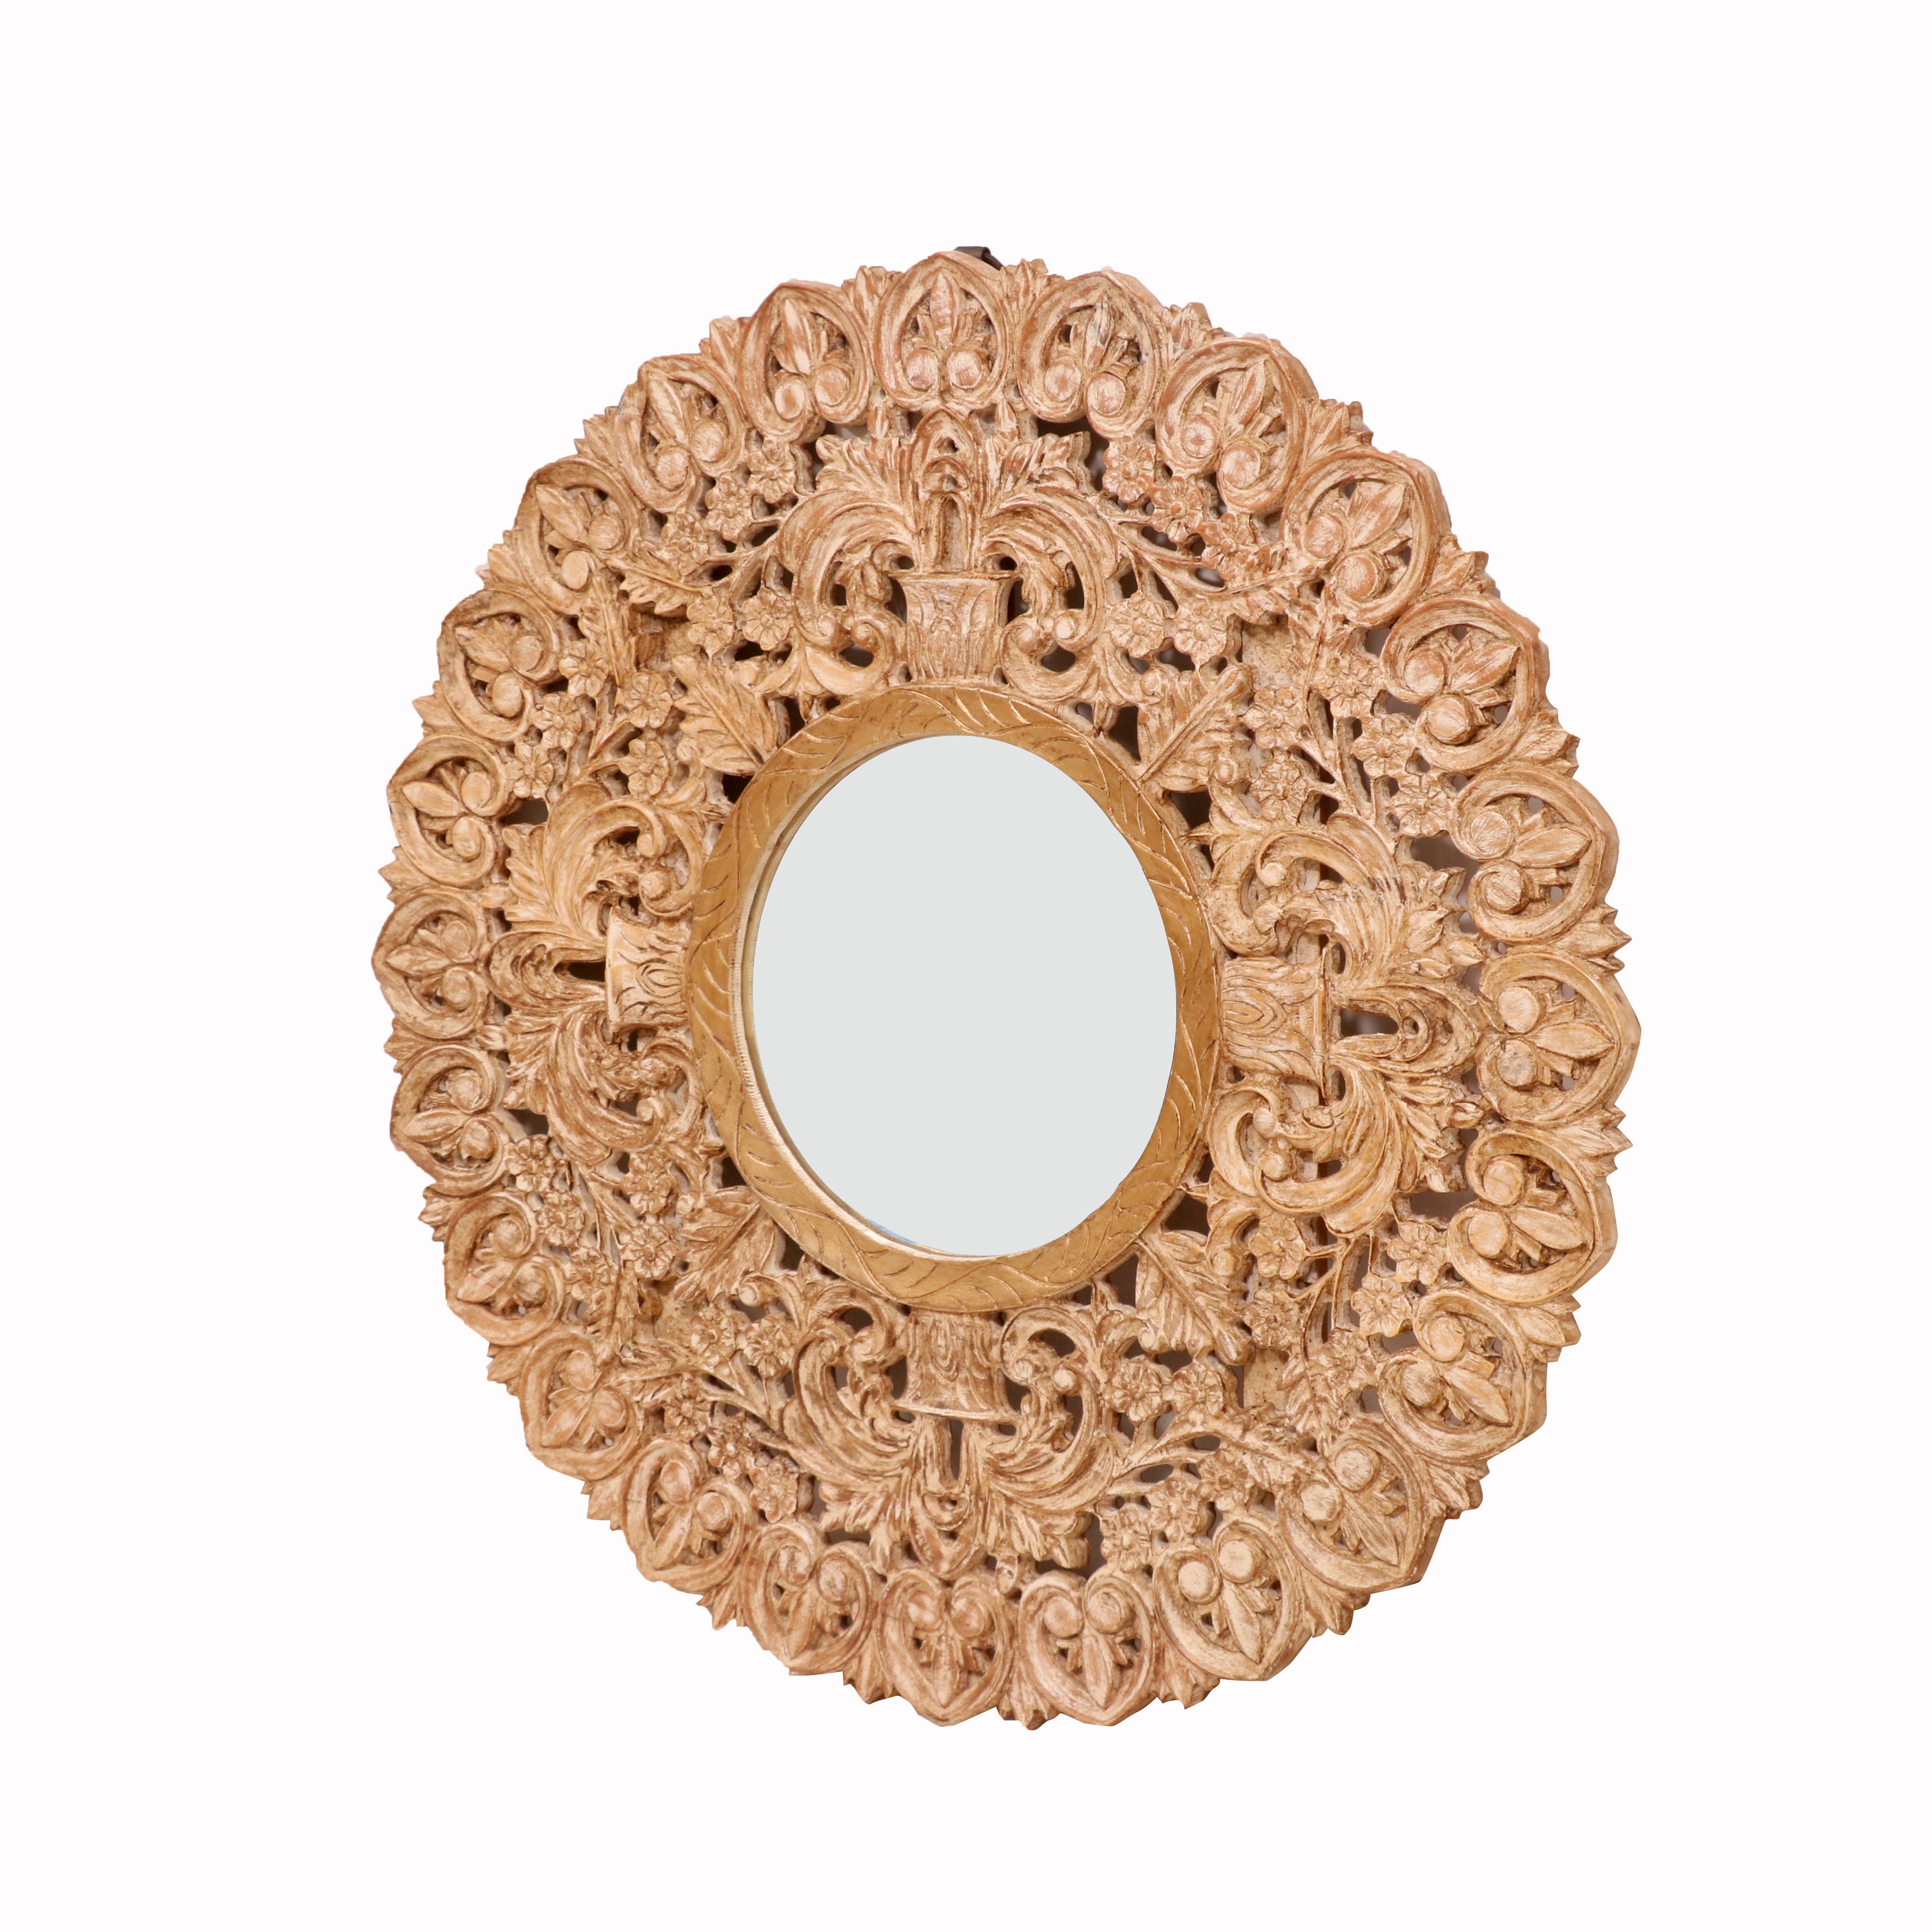 Mini Intricate Carved Wooden Mirror Mirror